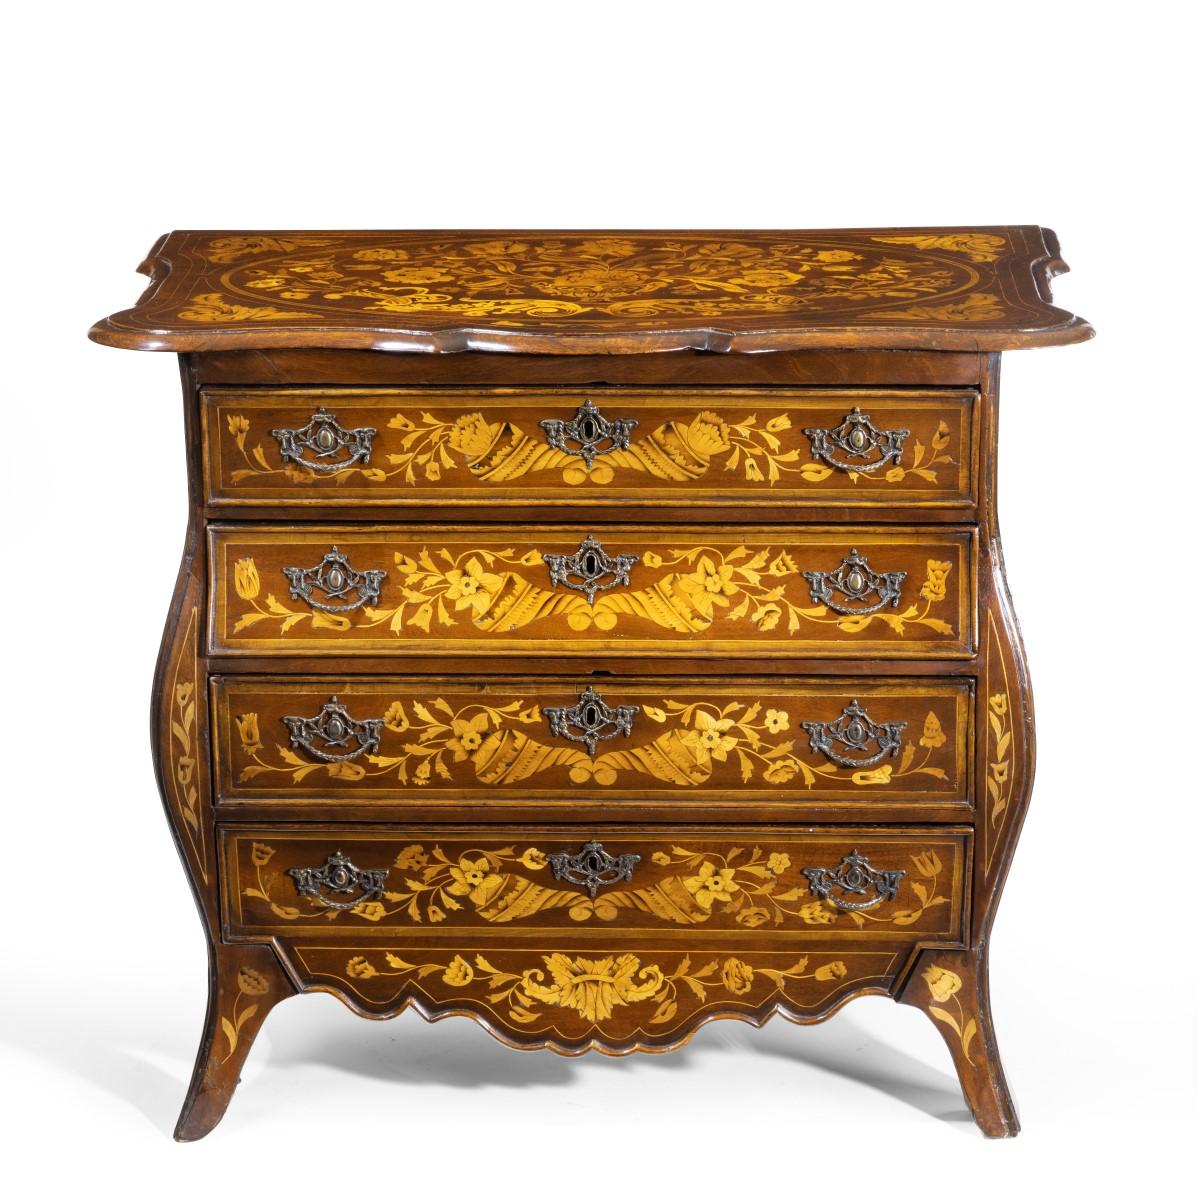 A period Dutch mahogany four-drawer bombe marquetry commode, the serpentine shaped top overhanging four graduated drawers, three with bombe front and sides, above a serpentine apron and splayed feet, profusely decorated throughout with variegated